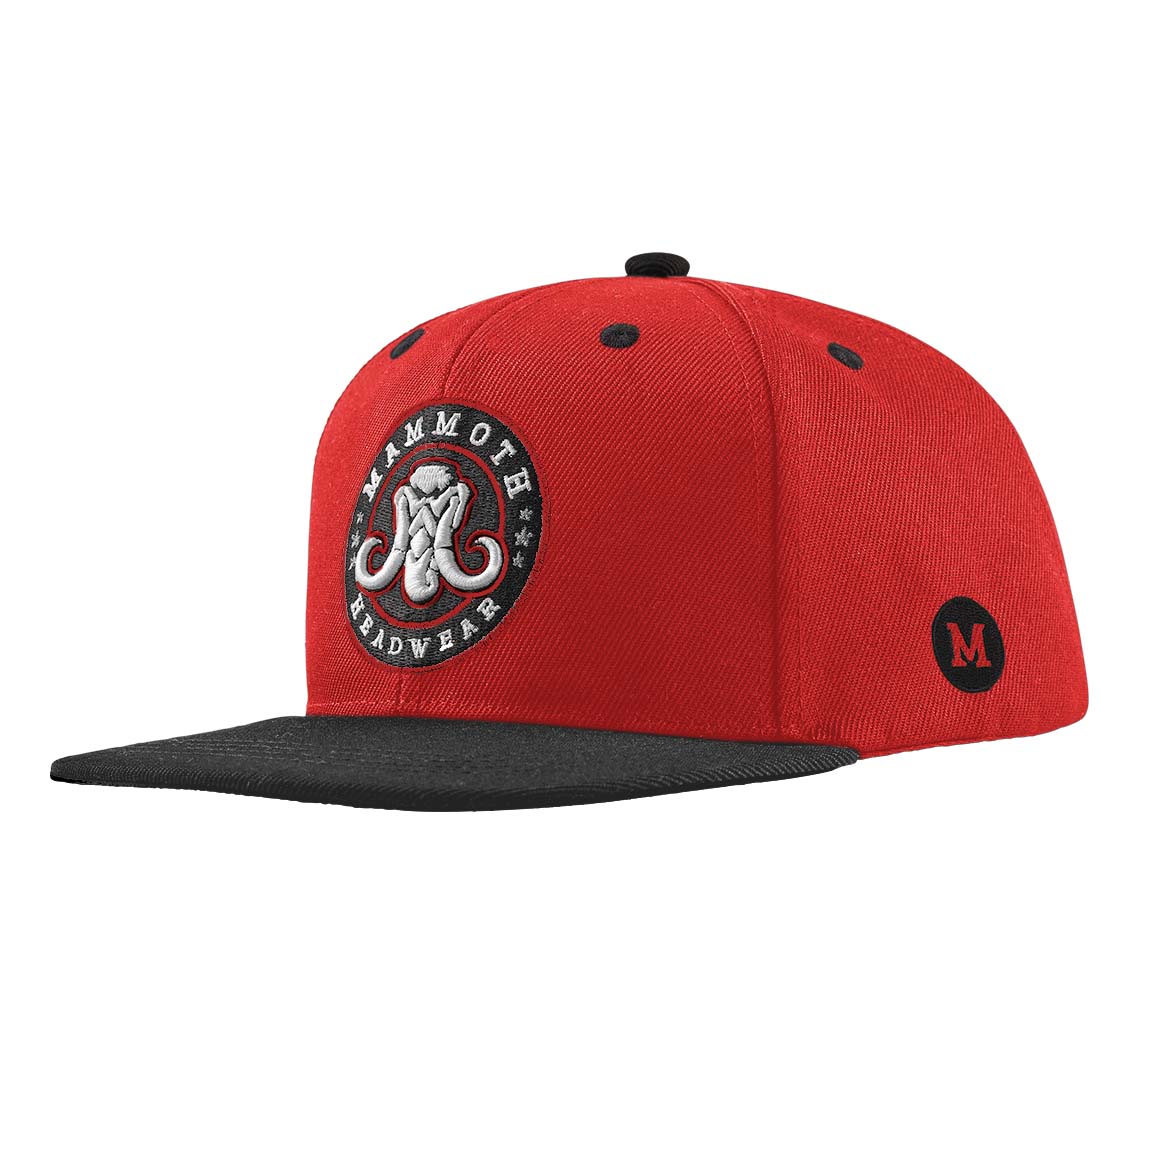 The Classic Snapback Hat in Red by Mammoth Headwear